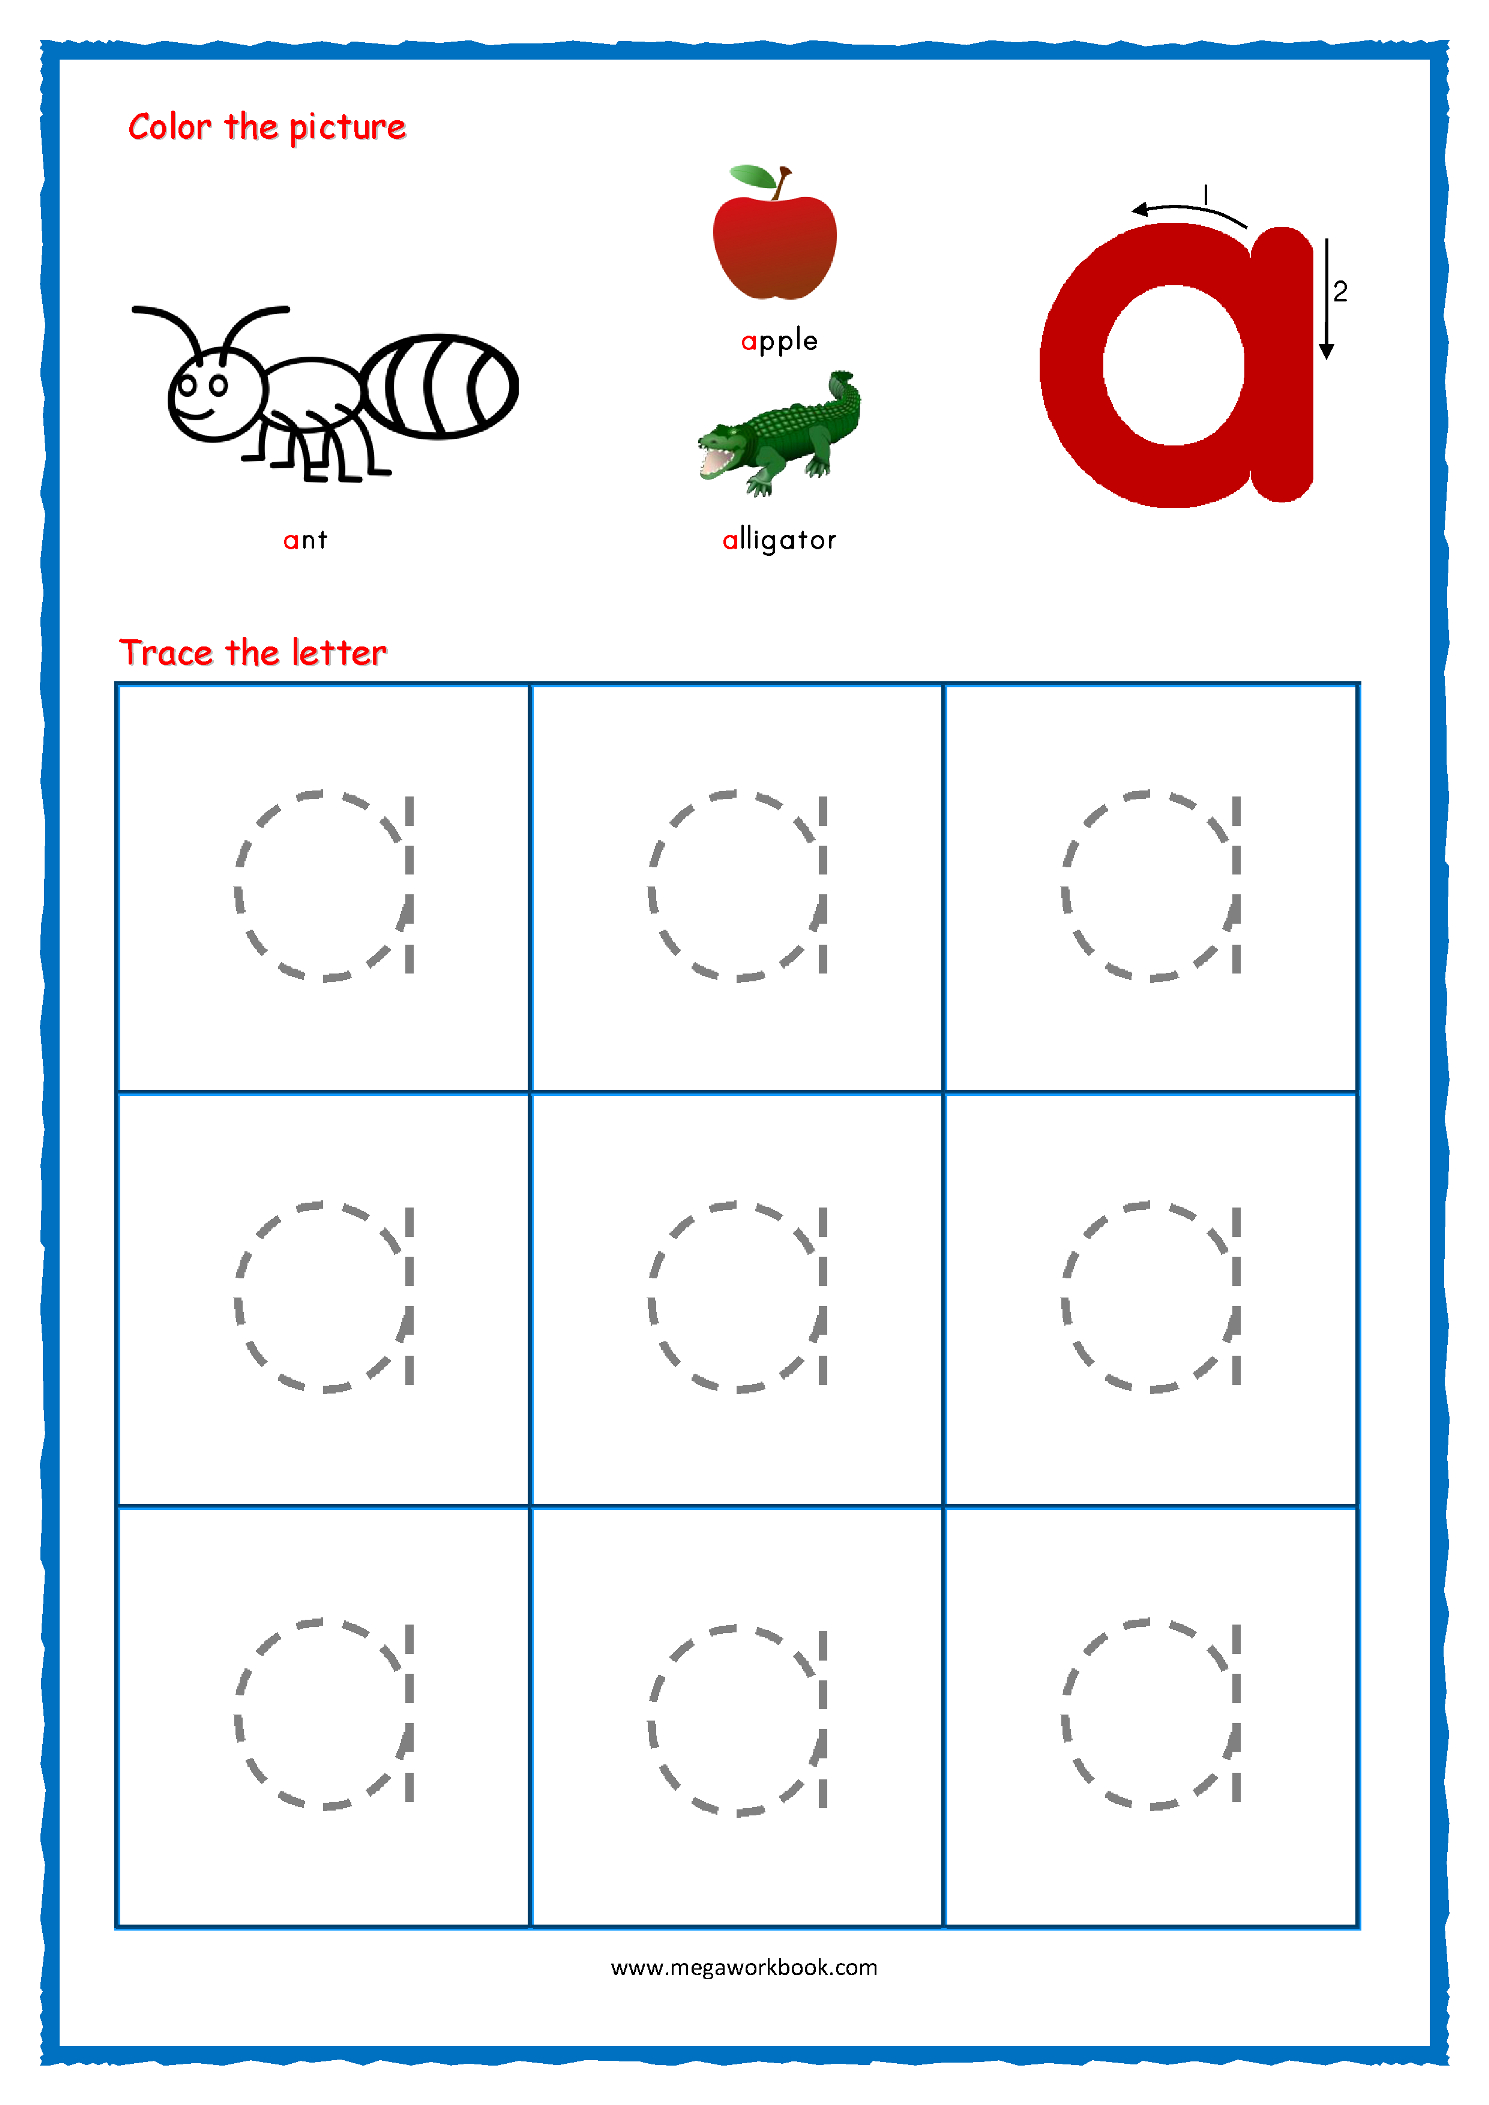 Alphabet Tracing - Small Letters - Alphabet Tracing regarding Tracing Lowercase Letters Printable Worksheets